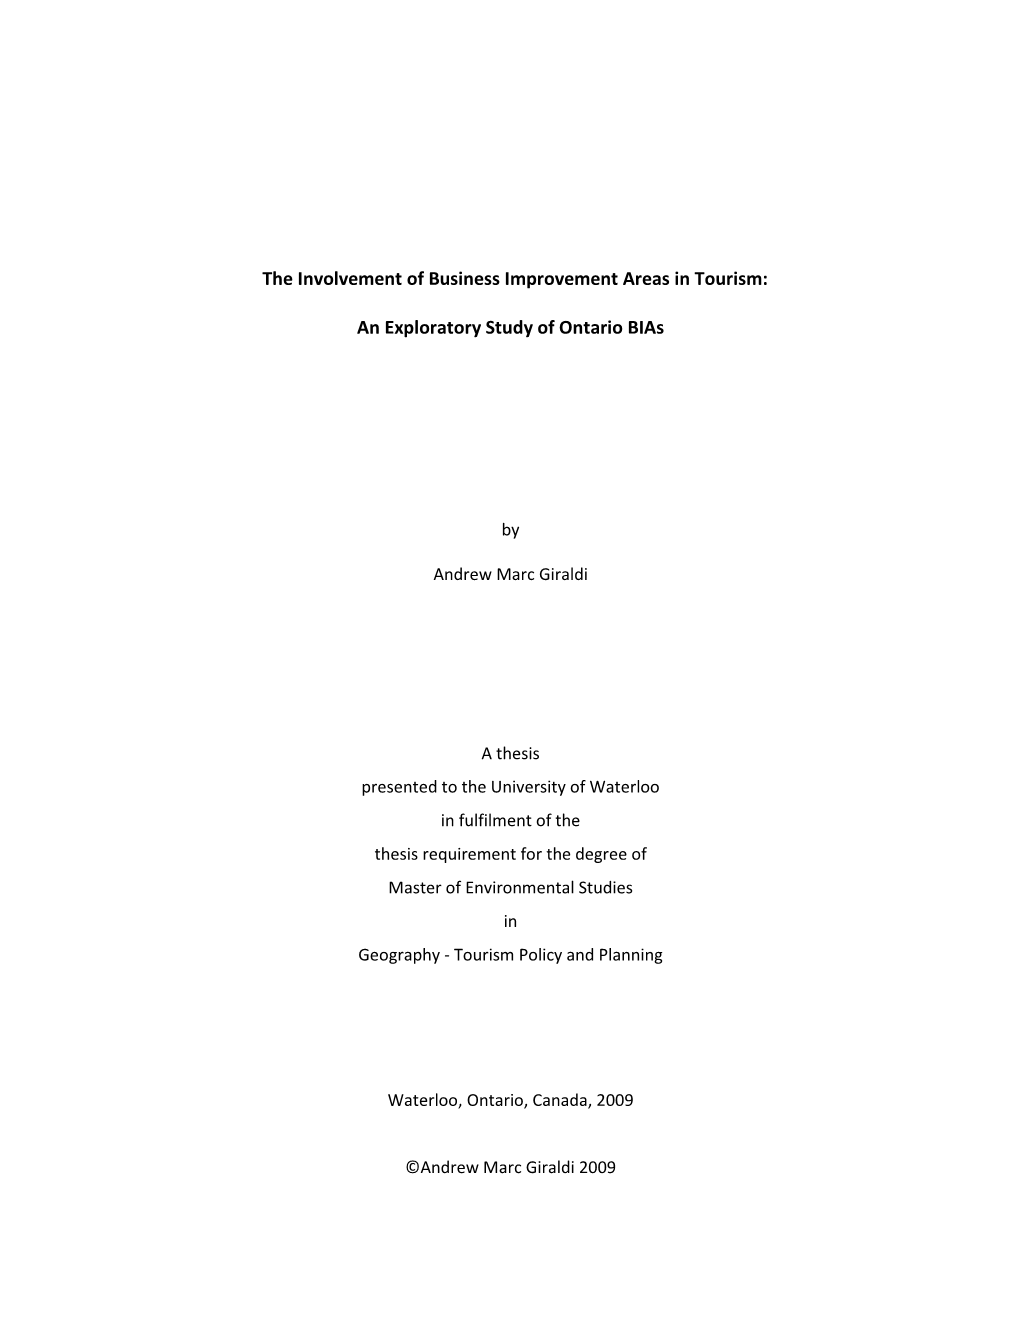 The Involvement of Business Improvement Areas in Tourism: An